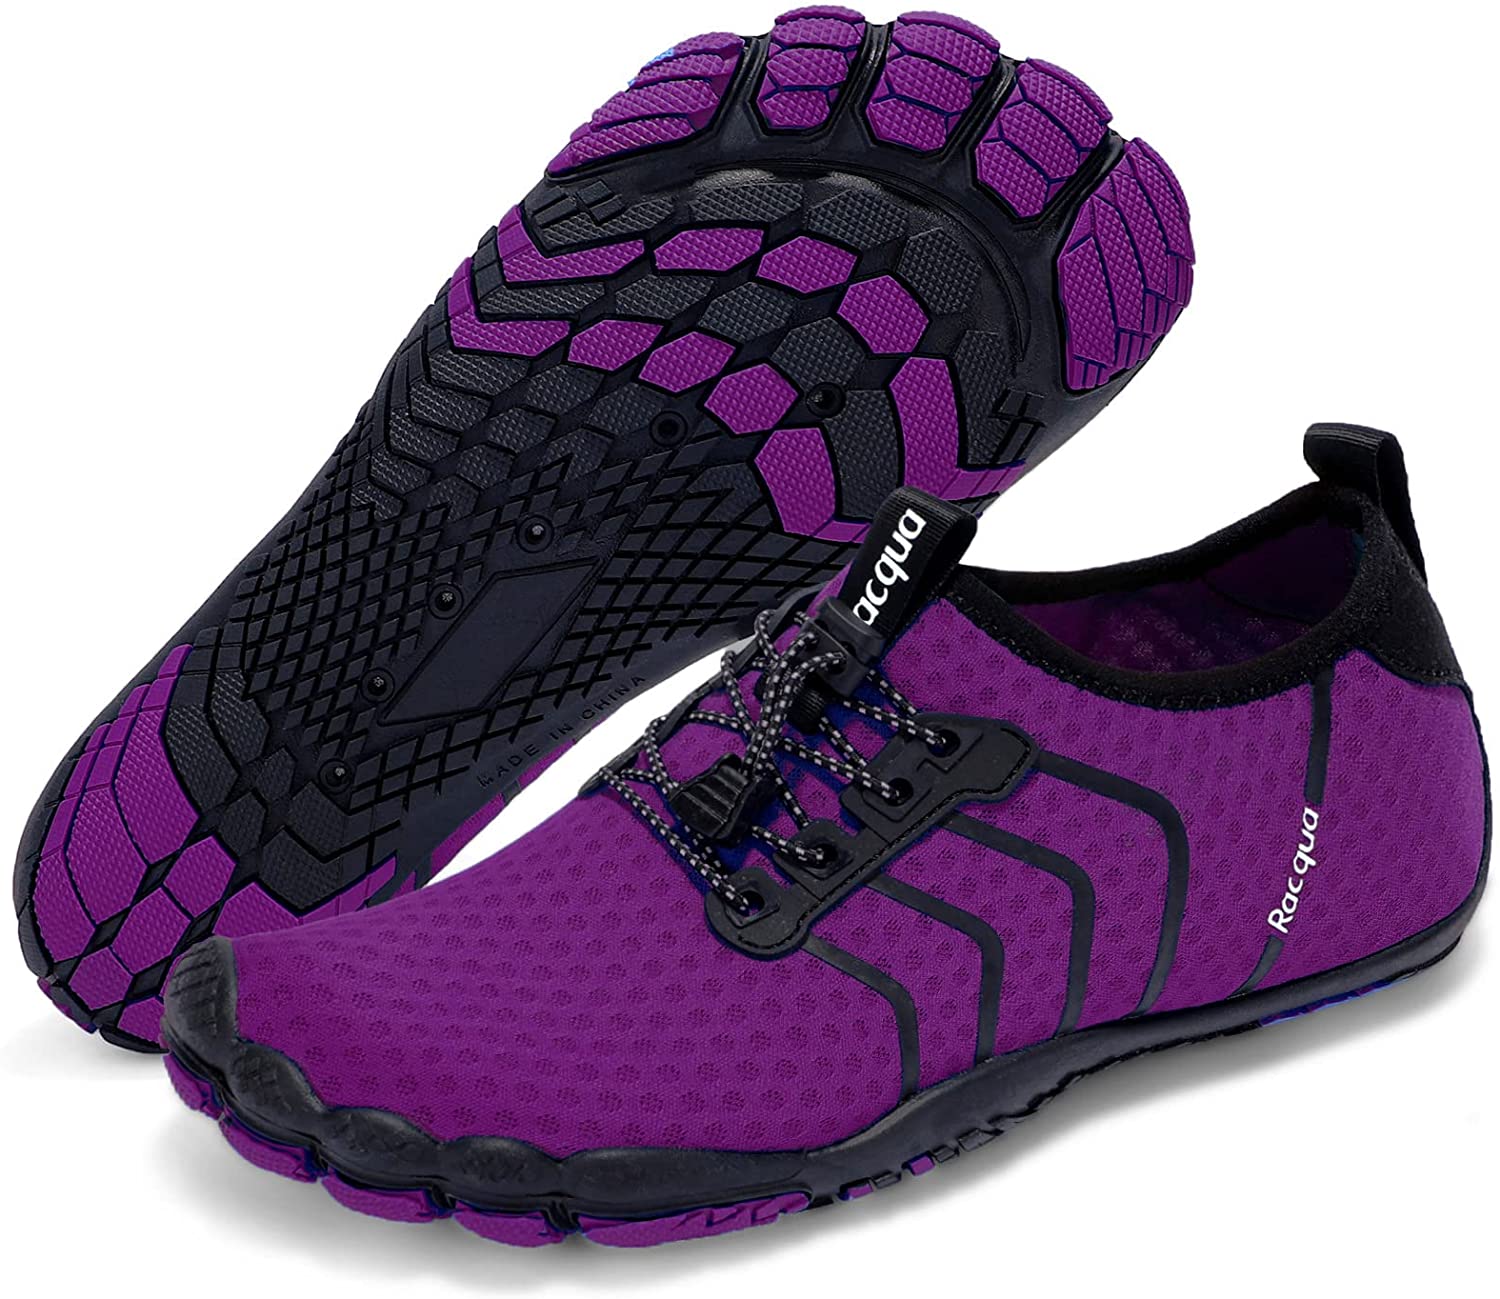 Barefoot Shoes for Women,Water Sports Outdoor Beach Aqua Shoes Swimming  Quick Dry Training Gym Wearproof Beach Sneakers (Color : Pink purple, Size  : 42 EU)